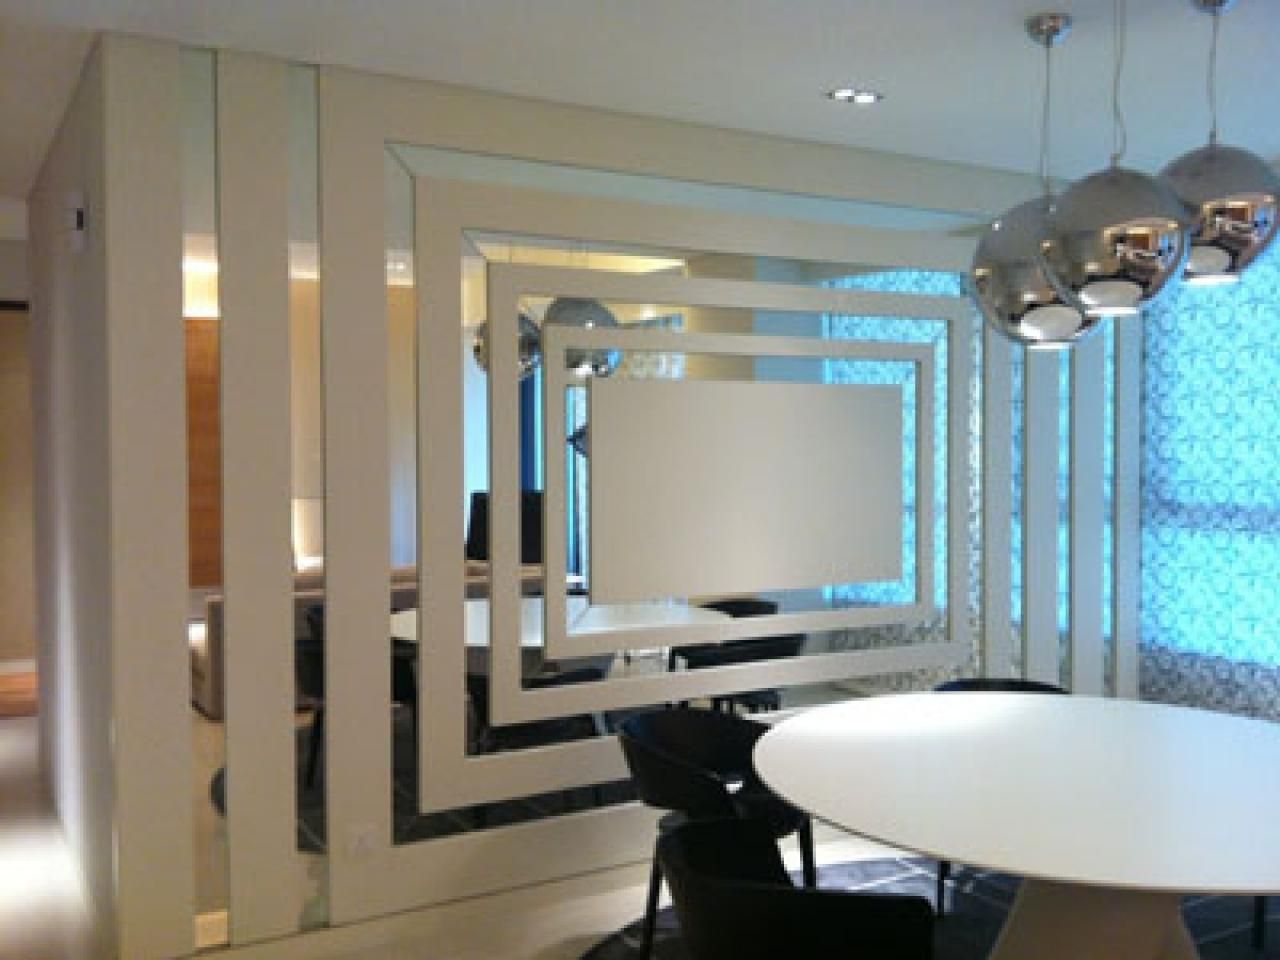 Design Wall Mirrors, Oval Bathroom Mirror Ideas Best Lighting For Throughout Walls Mirrors (View 3 of 20)